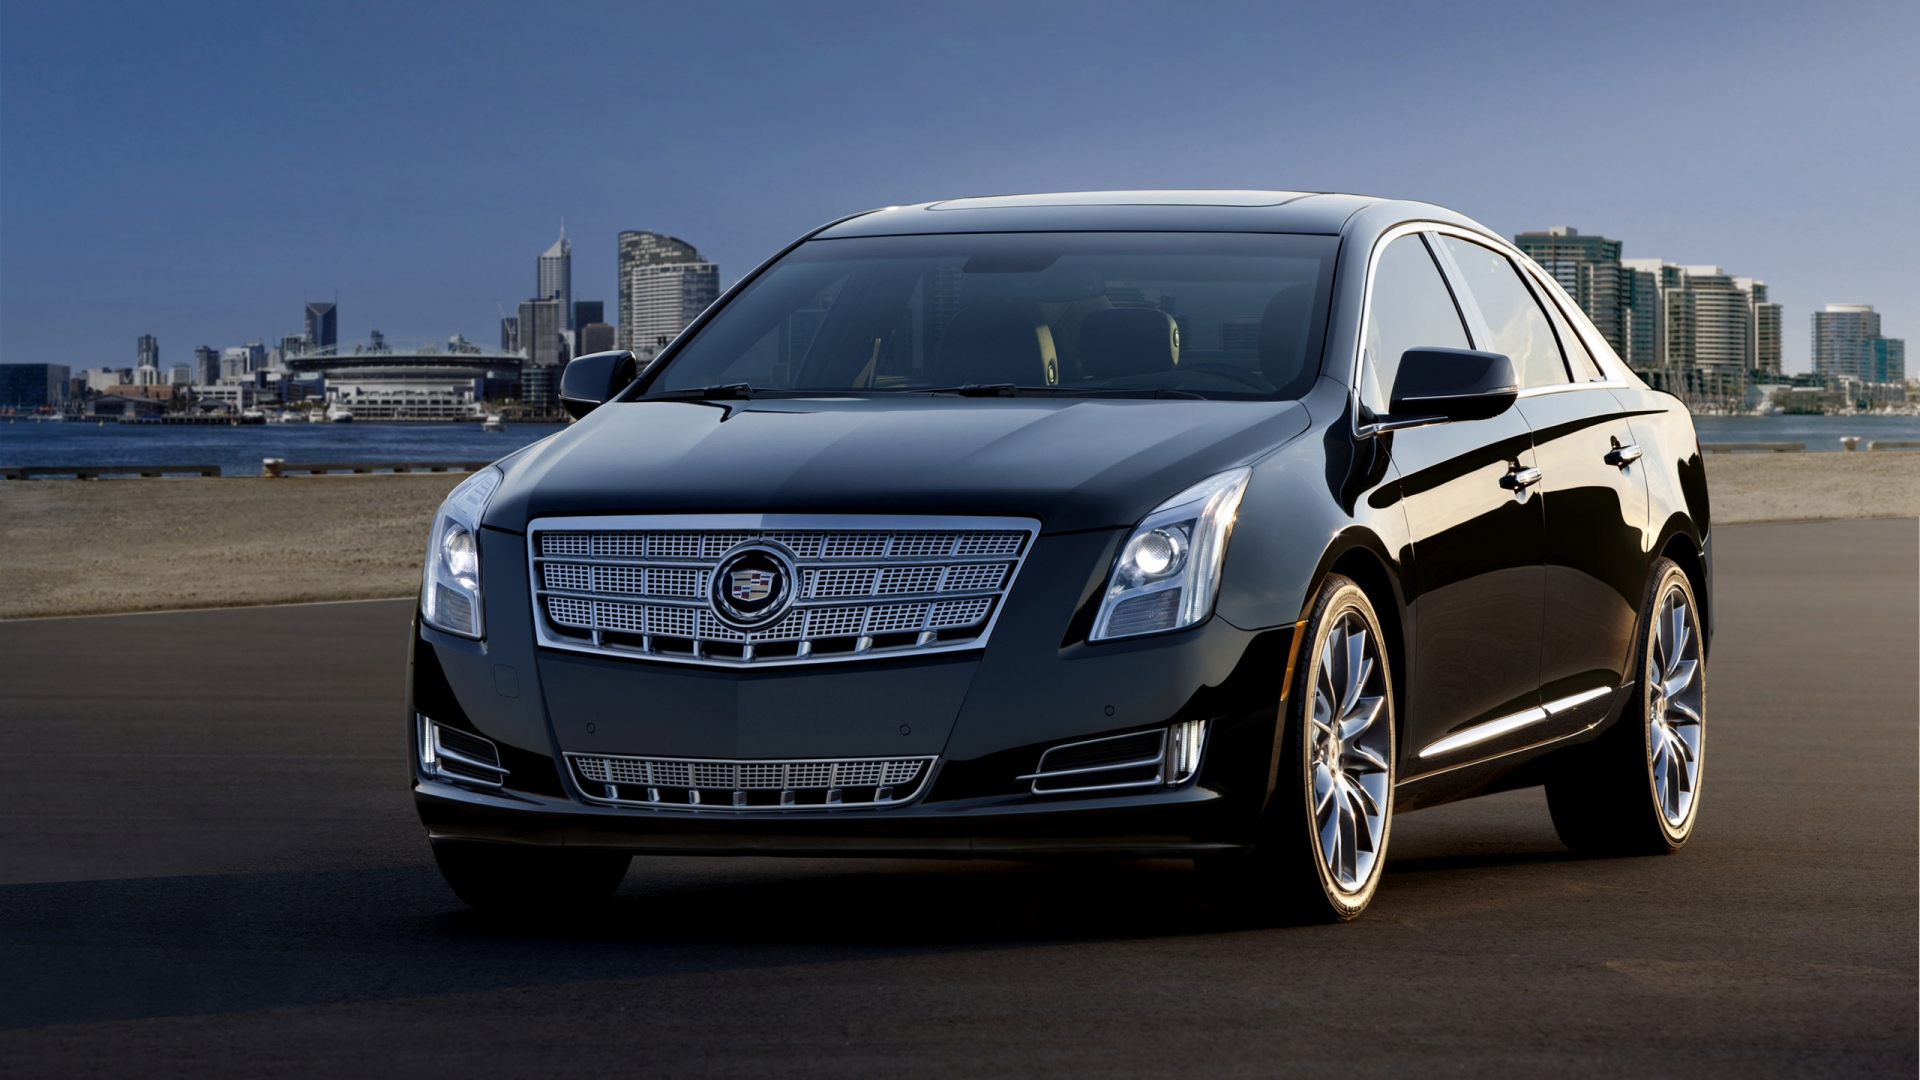 2013 Cadillac XTS for 1920 x 1080 HDTV 1080p resolution